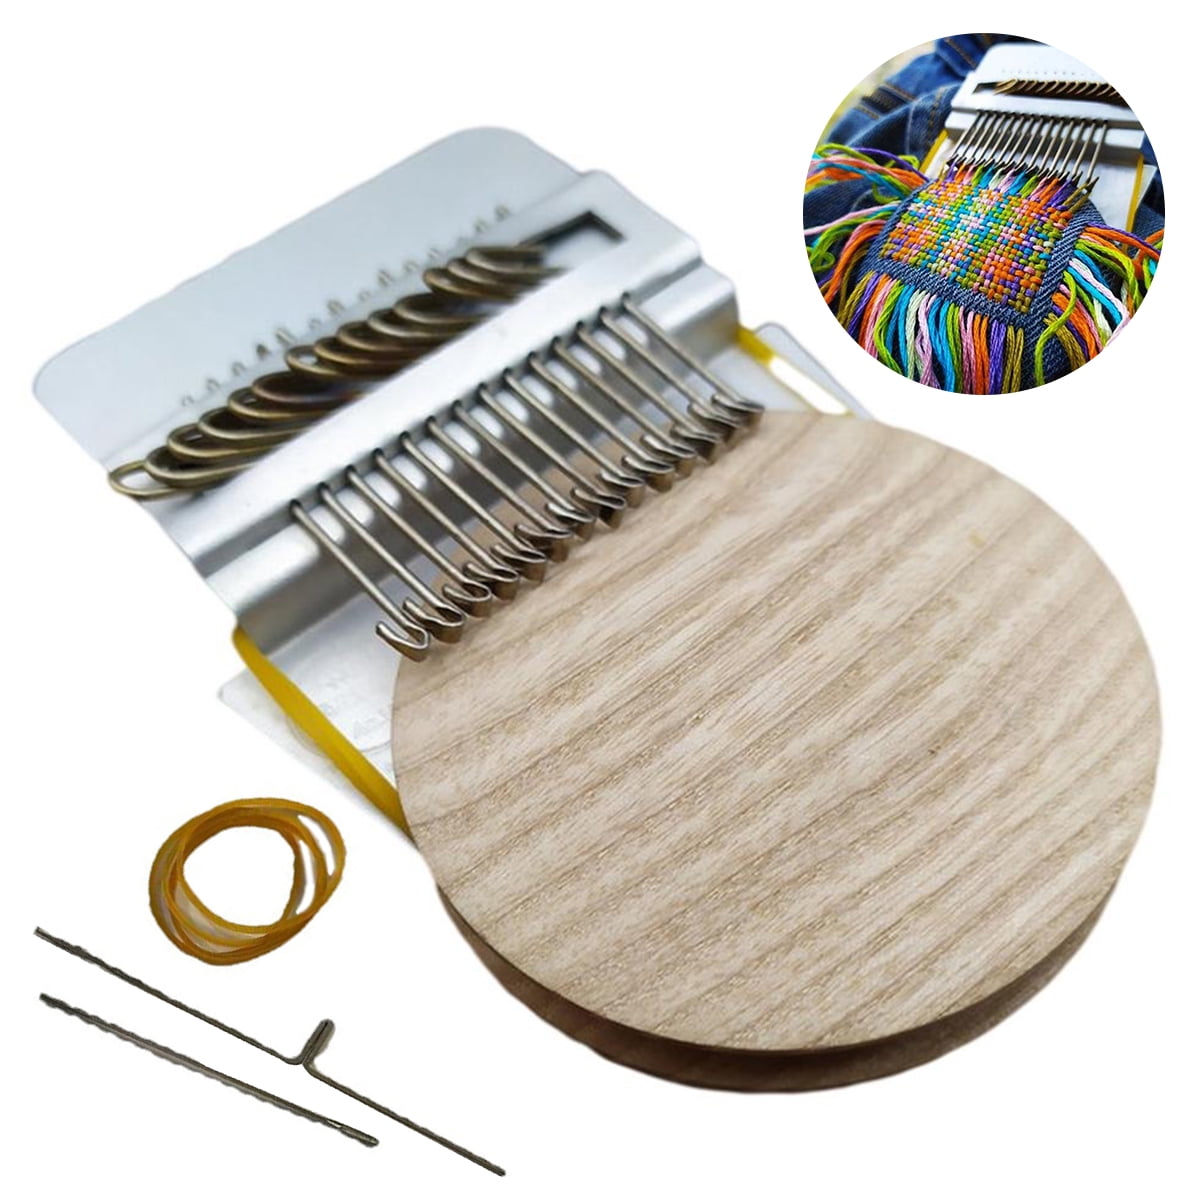 Aoulg Small Loom Speedweve Type Weave Tool Multi-Craft Braiding Patching Machine Wooden Fun DIY Hand-Held Miniature Loom 